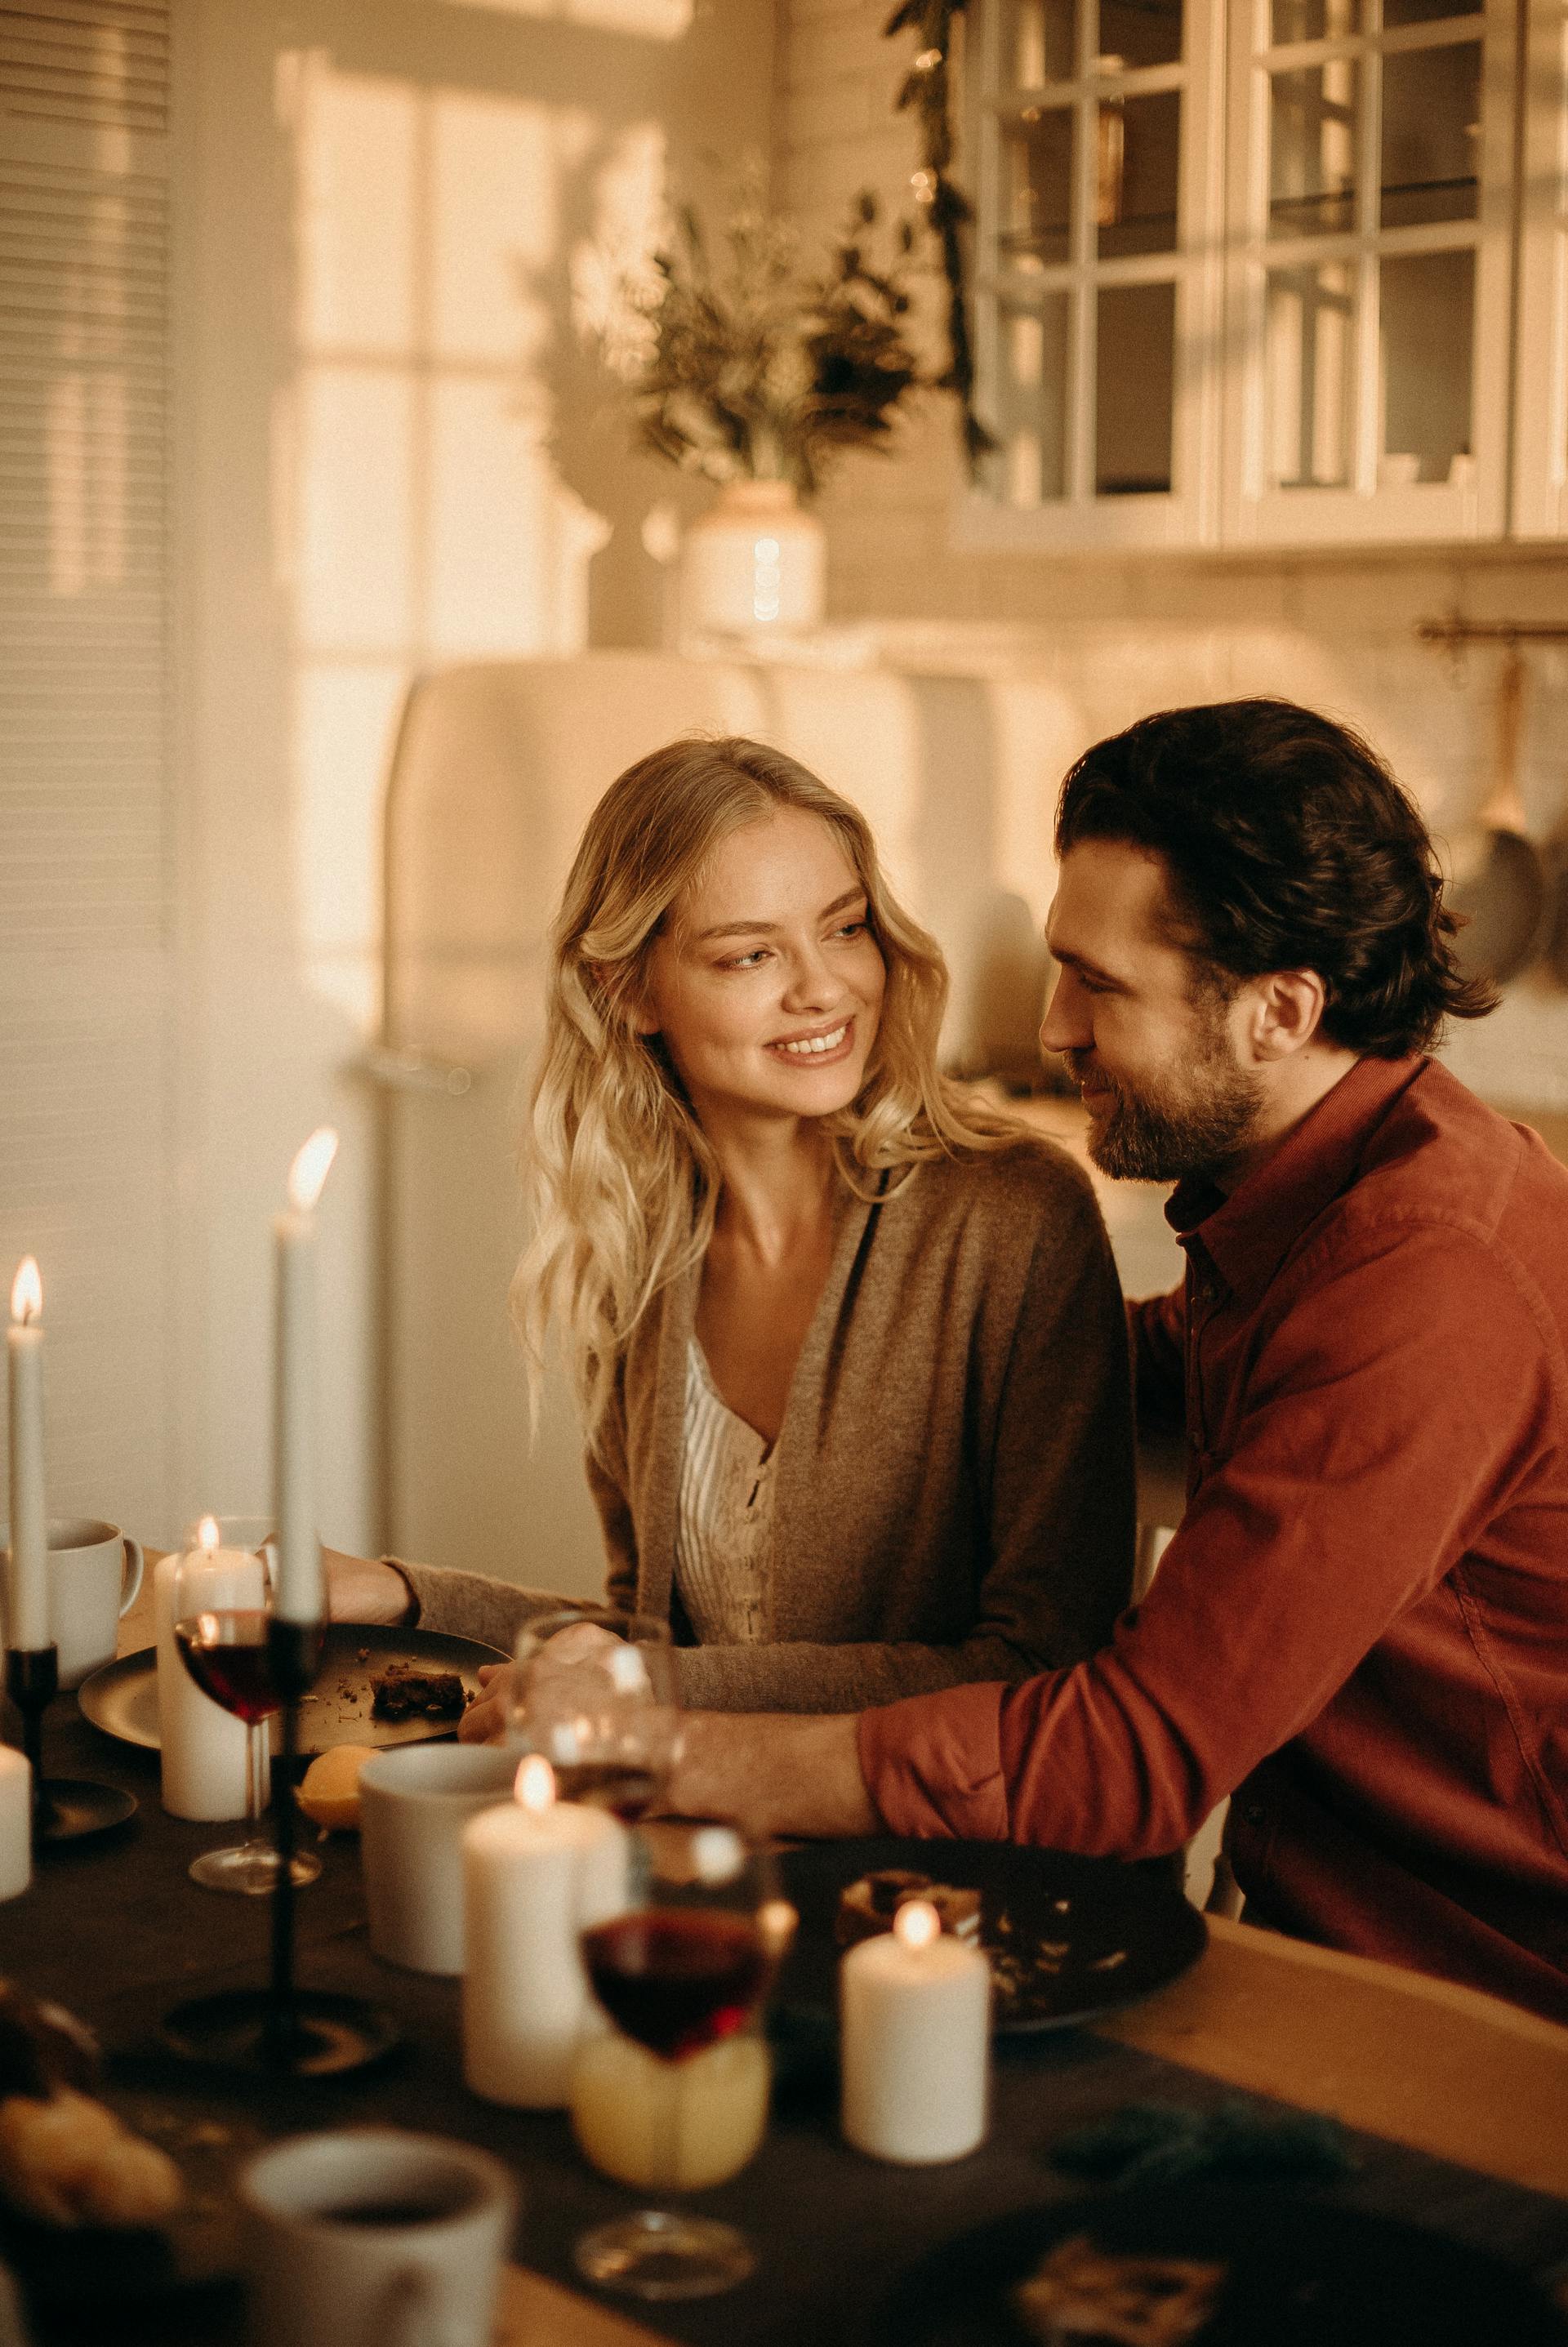 A couple sitting at a table | Source: Pexels